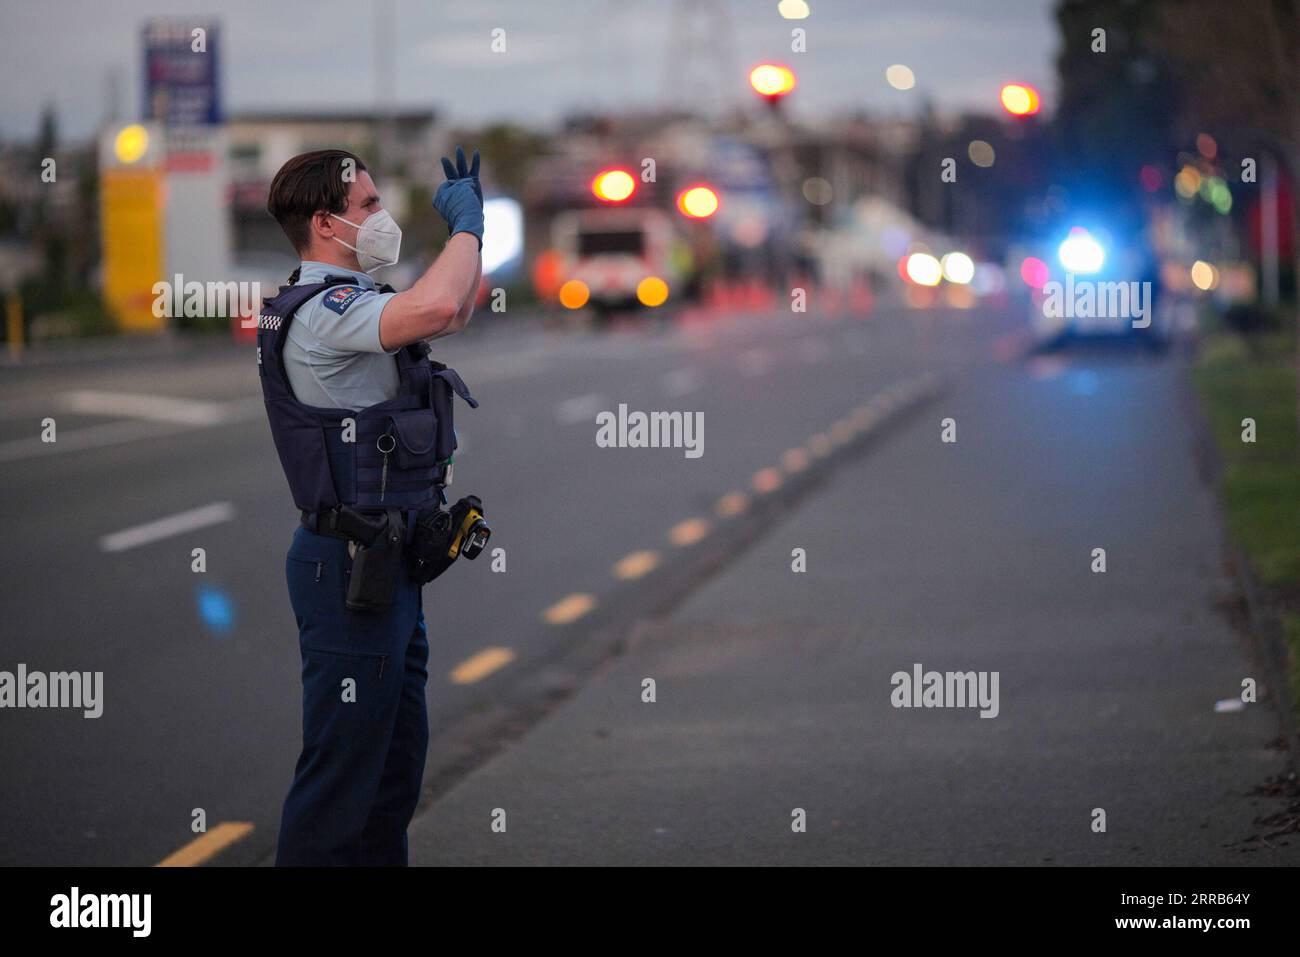 210903 -- AUCKLAND, Sept. 3, 2021 -- A police officer stands guard near the New Lynn supermarket in Auckland, New Zealand, Sept. 3, 2021. New Zealand Prime Minister Jacinda Ardern confirmed that the violent attack that happened at New Lynn supermarket in Auckland at 2:40 p.m. local time Friday was a terrorist attack carried out by an extremist. Photo by /Xinhua NEW ZEALAND-AUCKLAND-SUPERMARKET-TERRORIST ATTACK ZhaoxGang PUBLICATIONxNOTxINxCHN Stock Photo